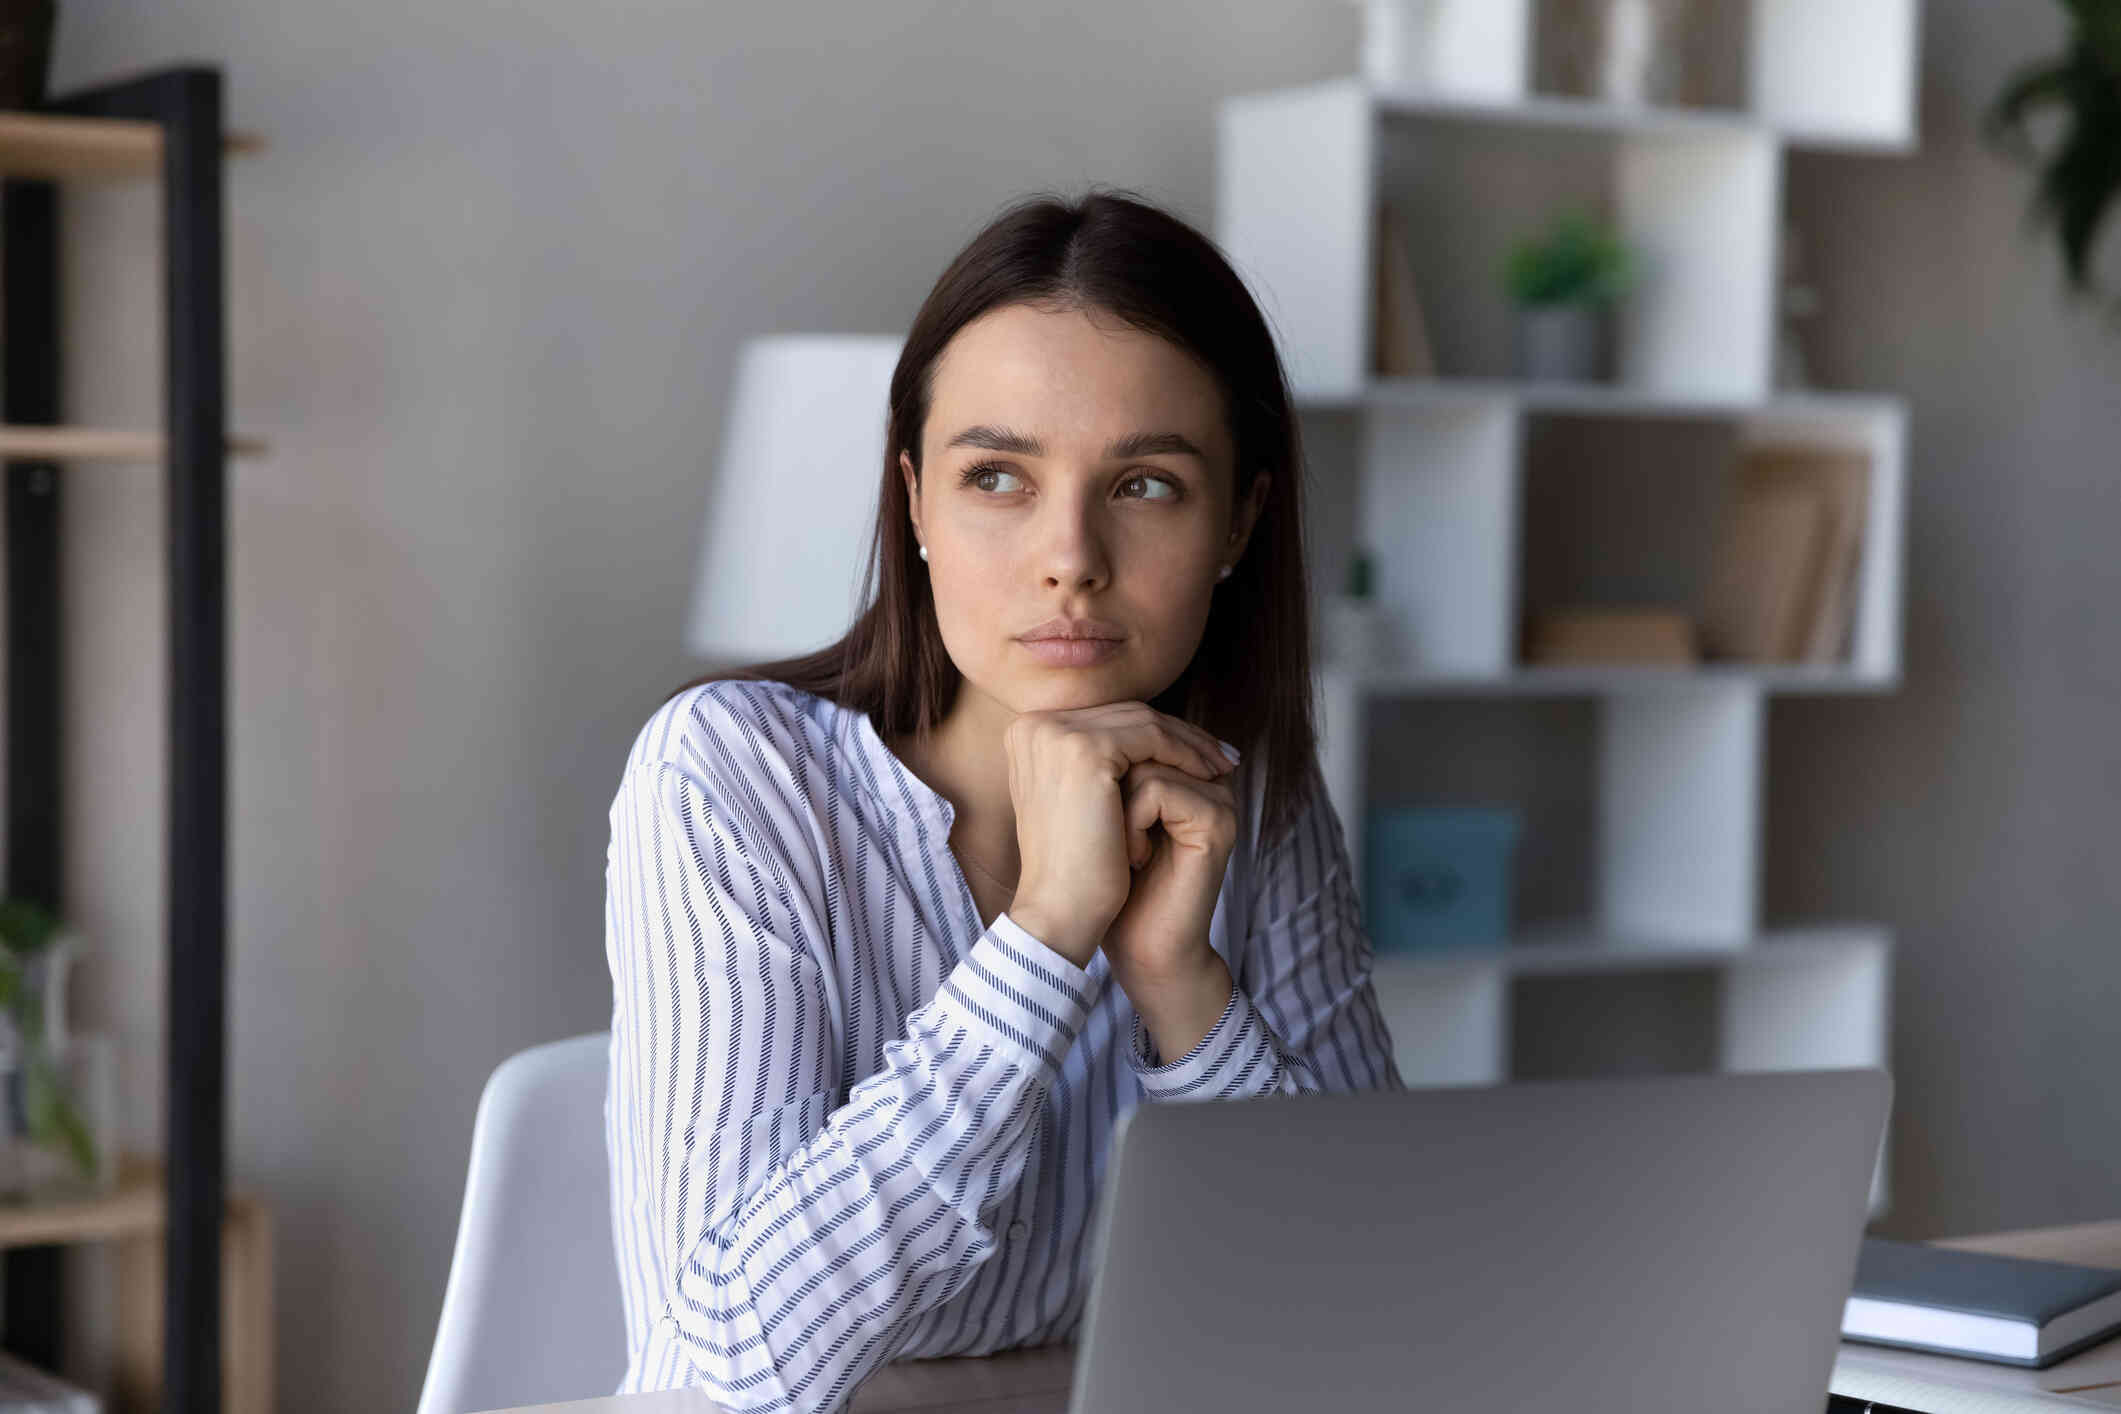 A woman in a striped shirt sits at a table with her laptop open infront of her as she gazes off with a worried expression.